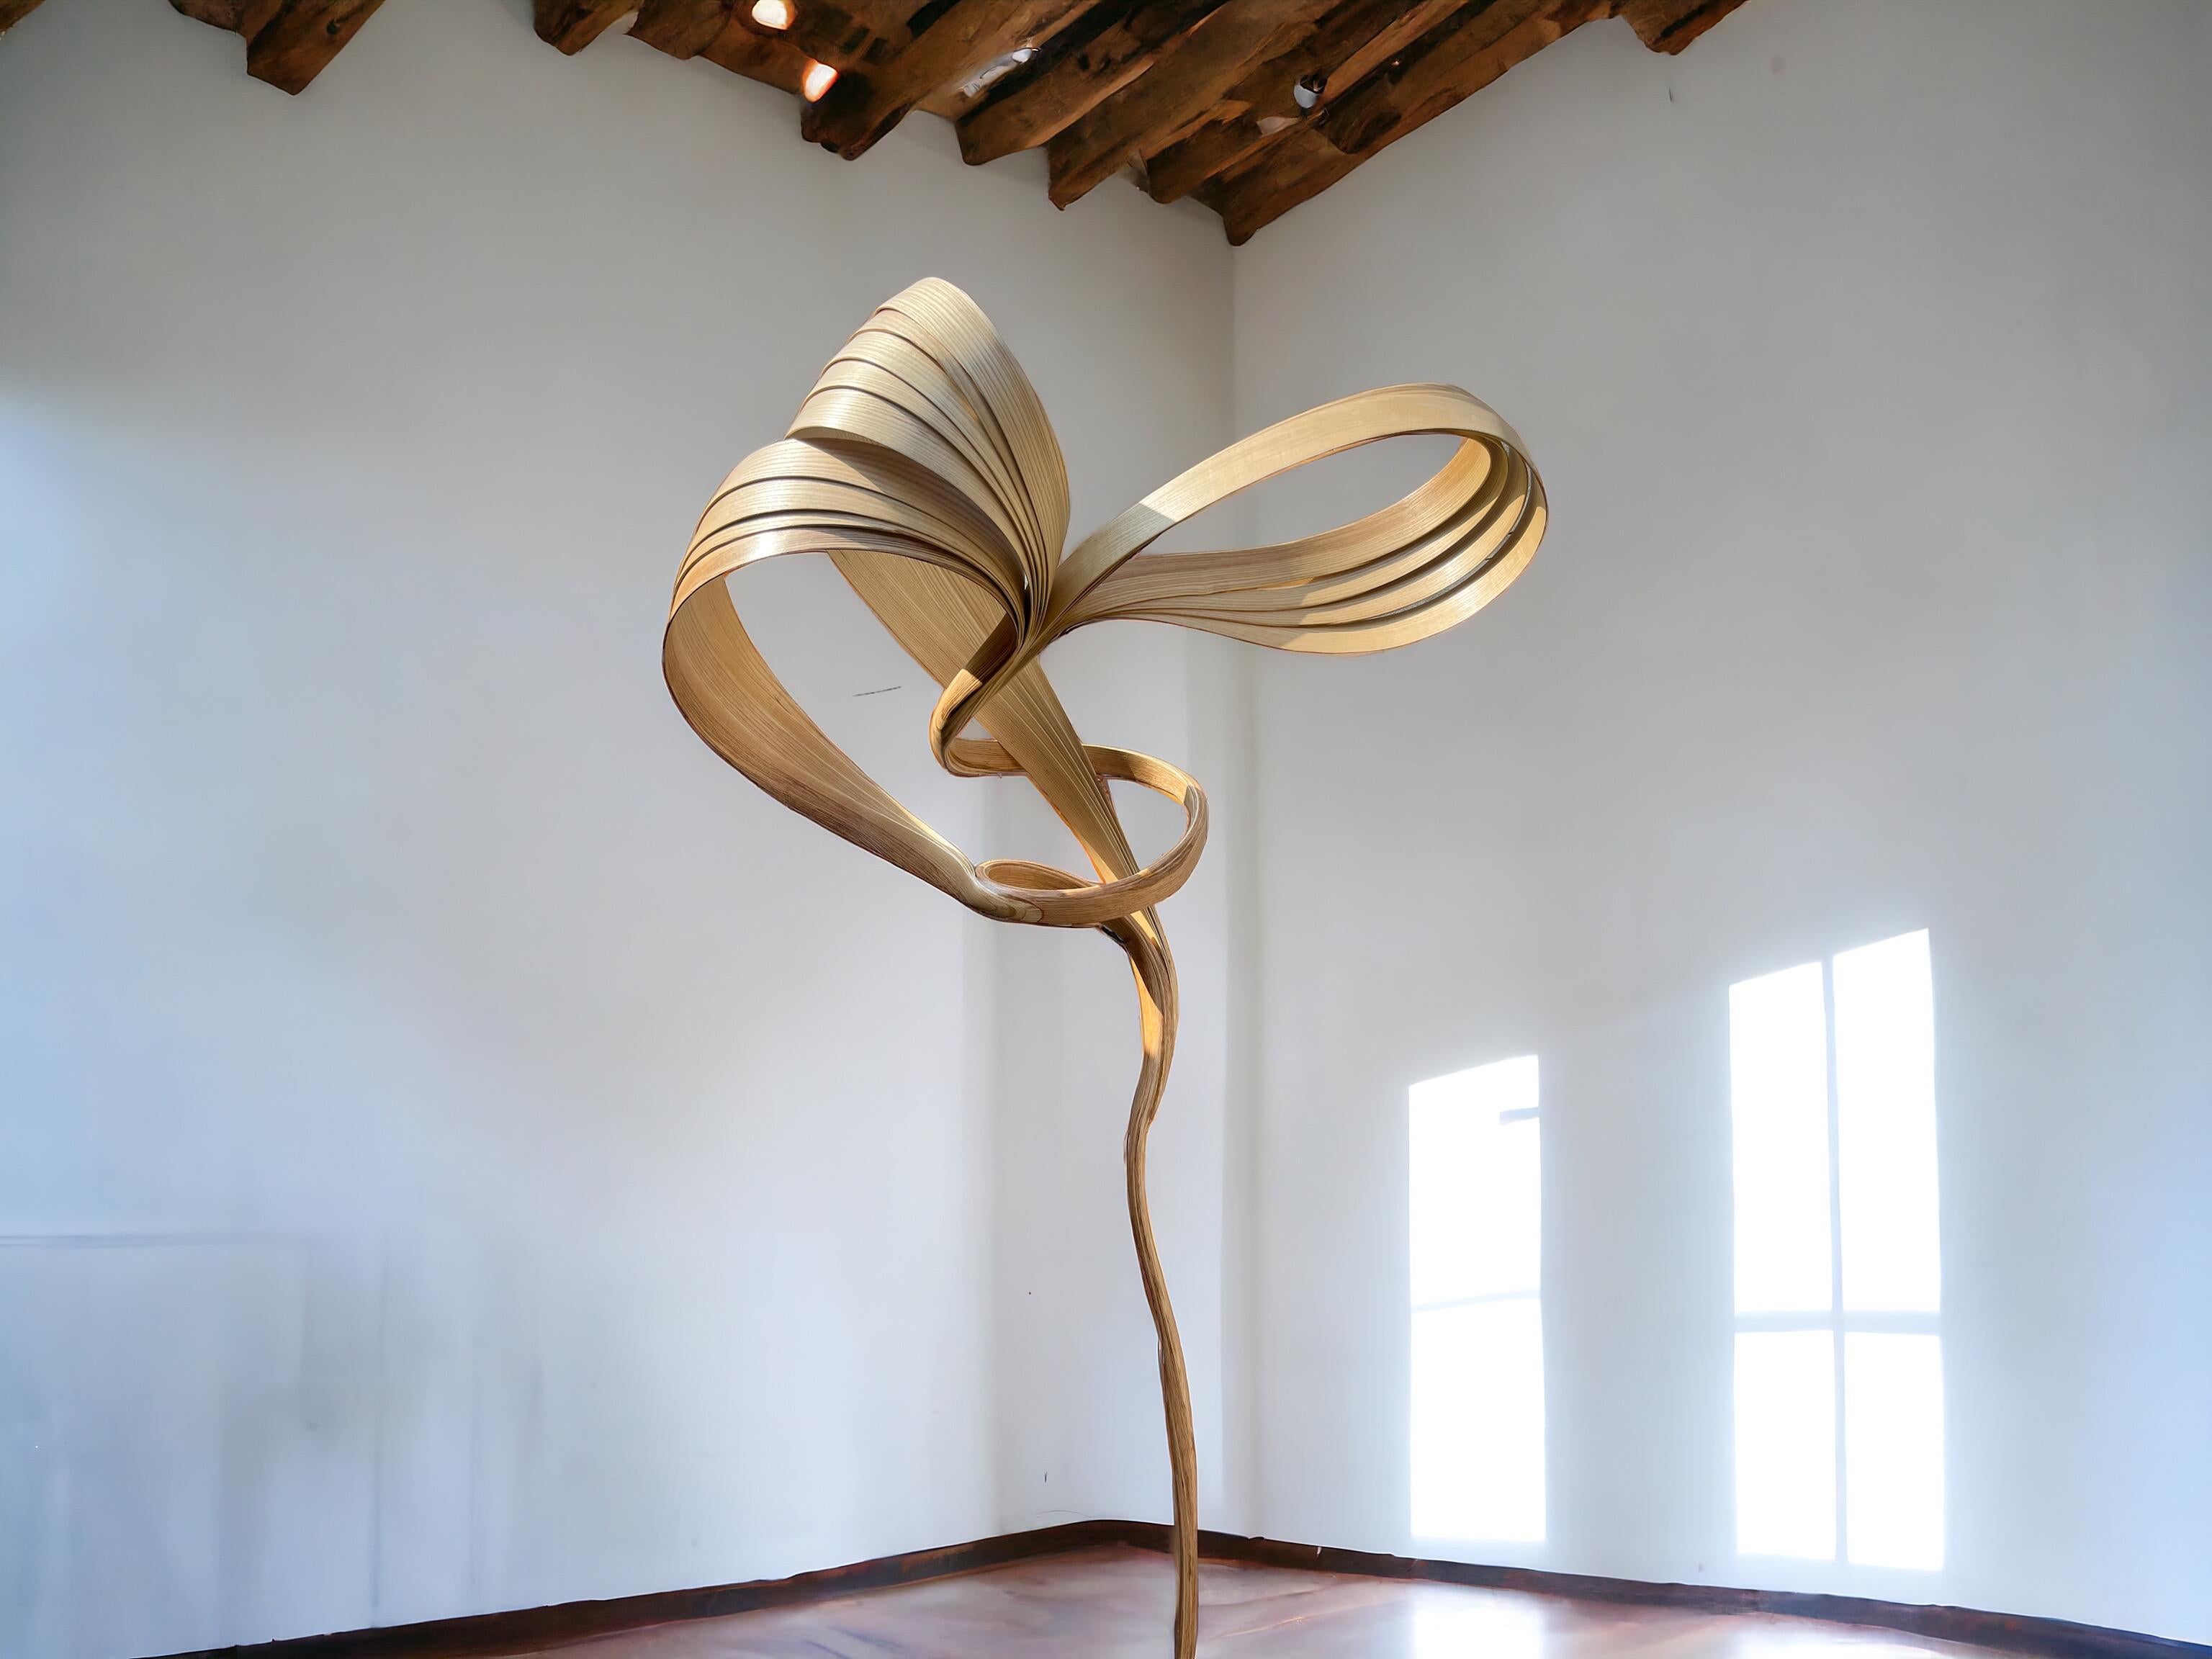 The sculpture demonstrates the flow of wood; the emerging and the reduction of wood while retaining an organic form. 

The Forms are directed towards exploring the crafting techniques used by the Studio in their purest; hence the pieces are